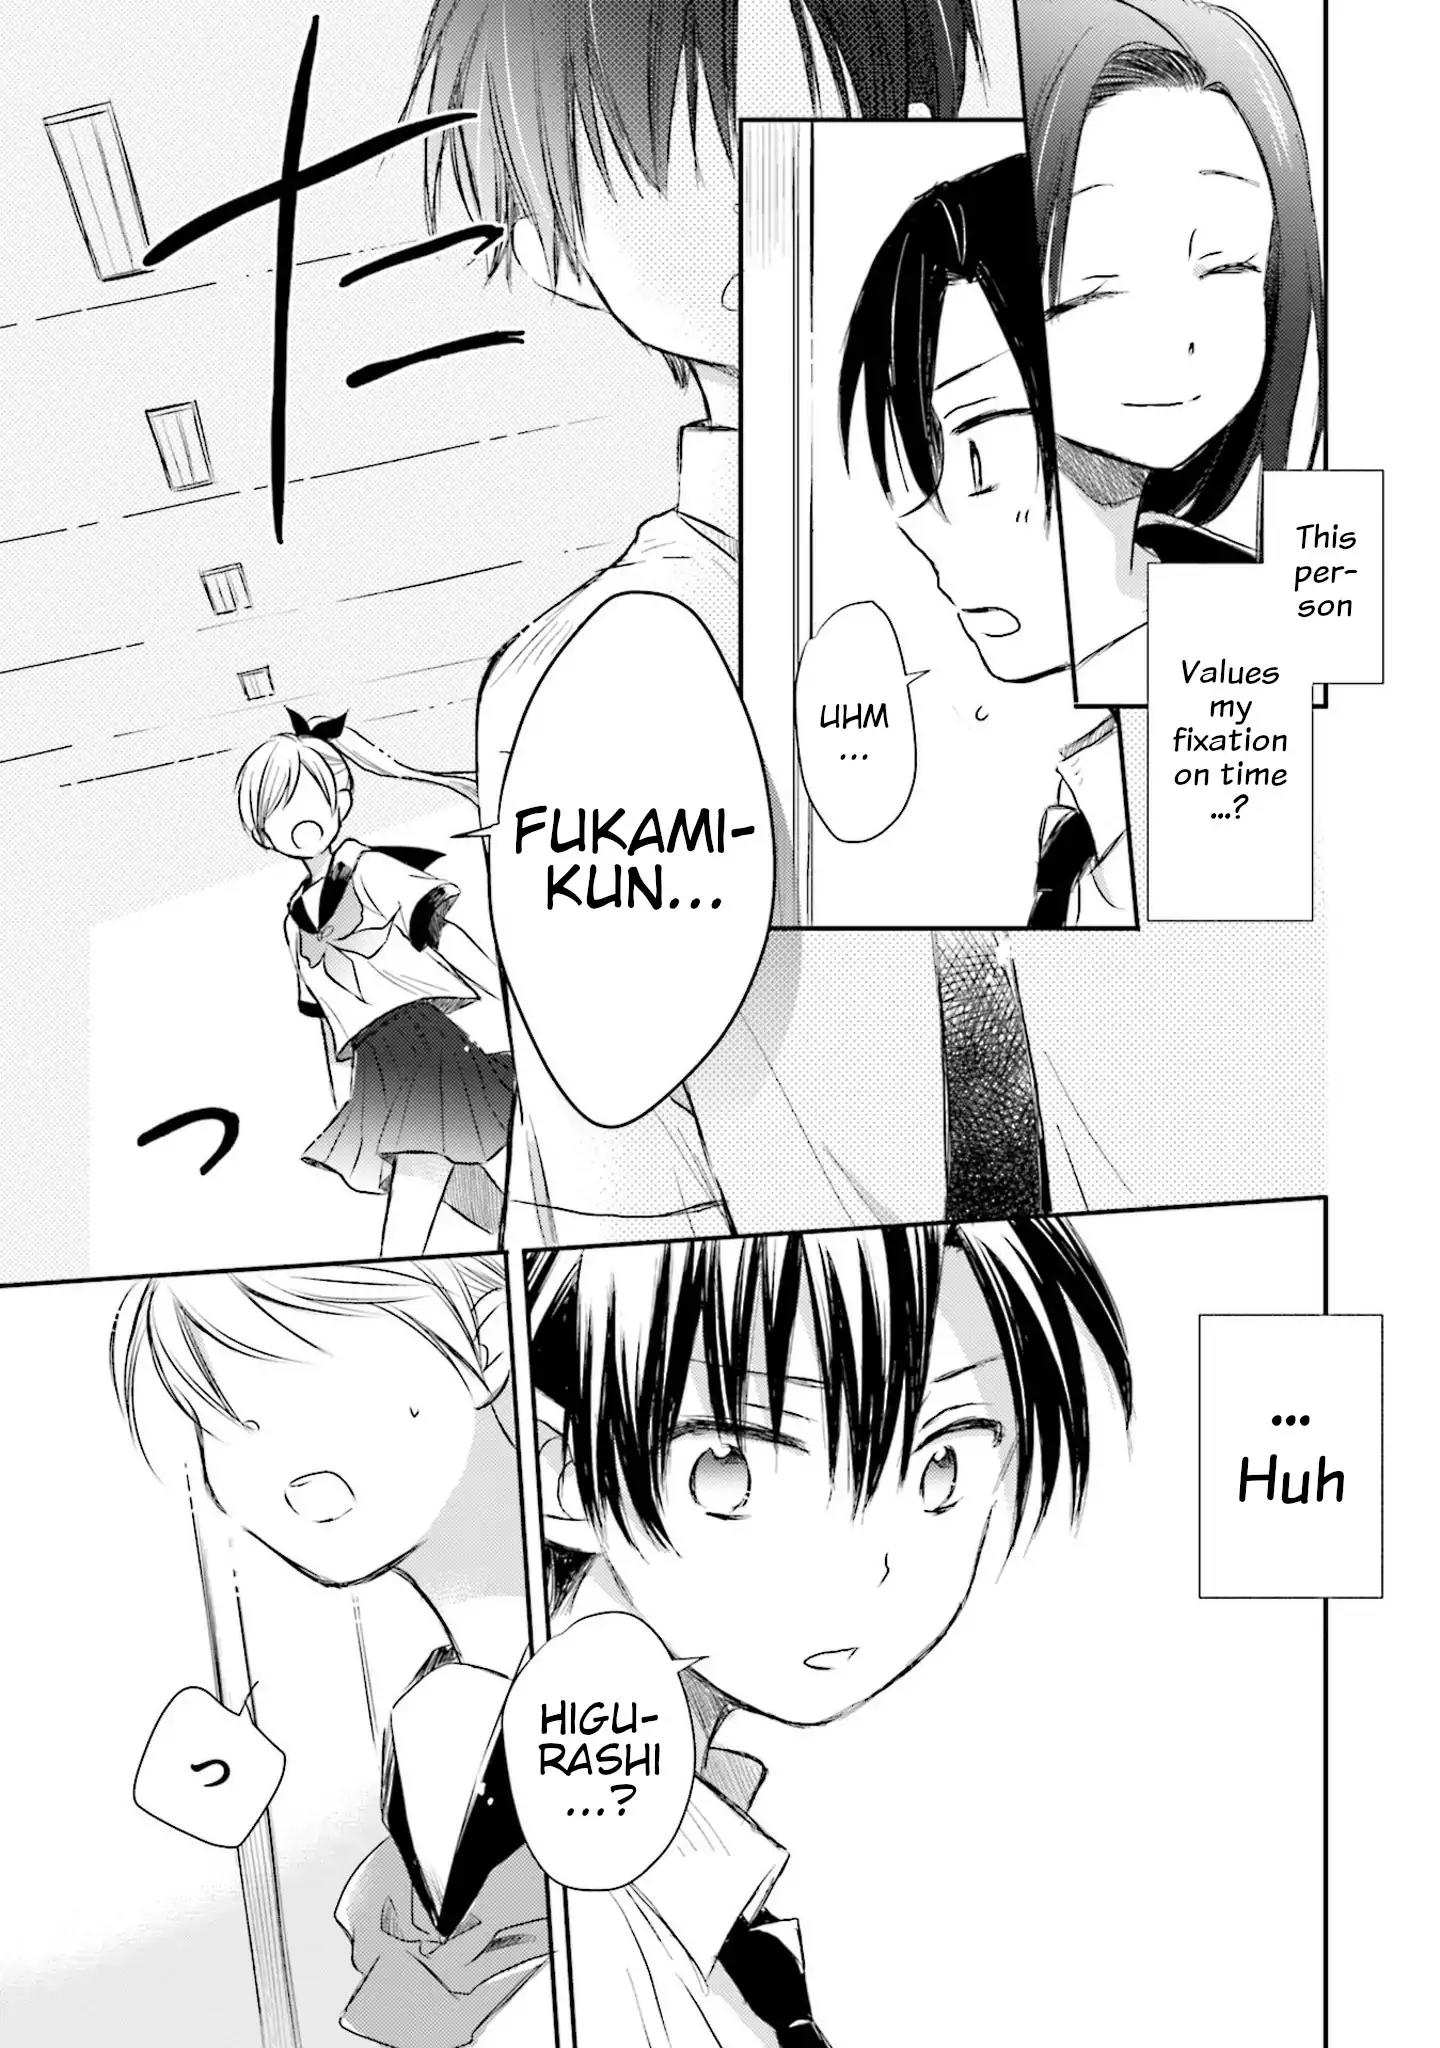 This Love Is Assumption Outside for Fukami Kun Vol.1 Chapter 11